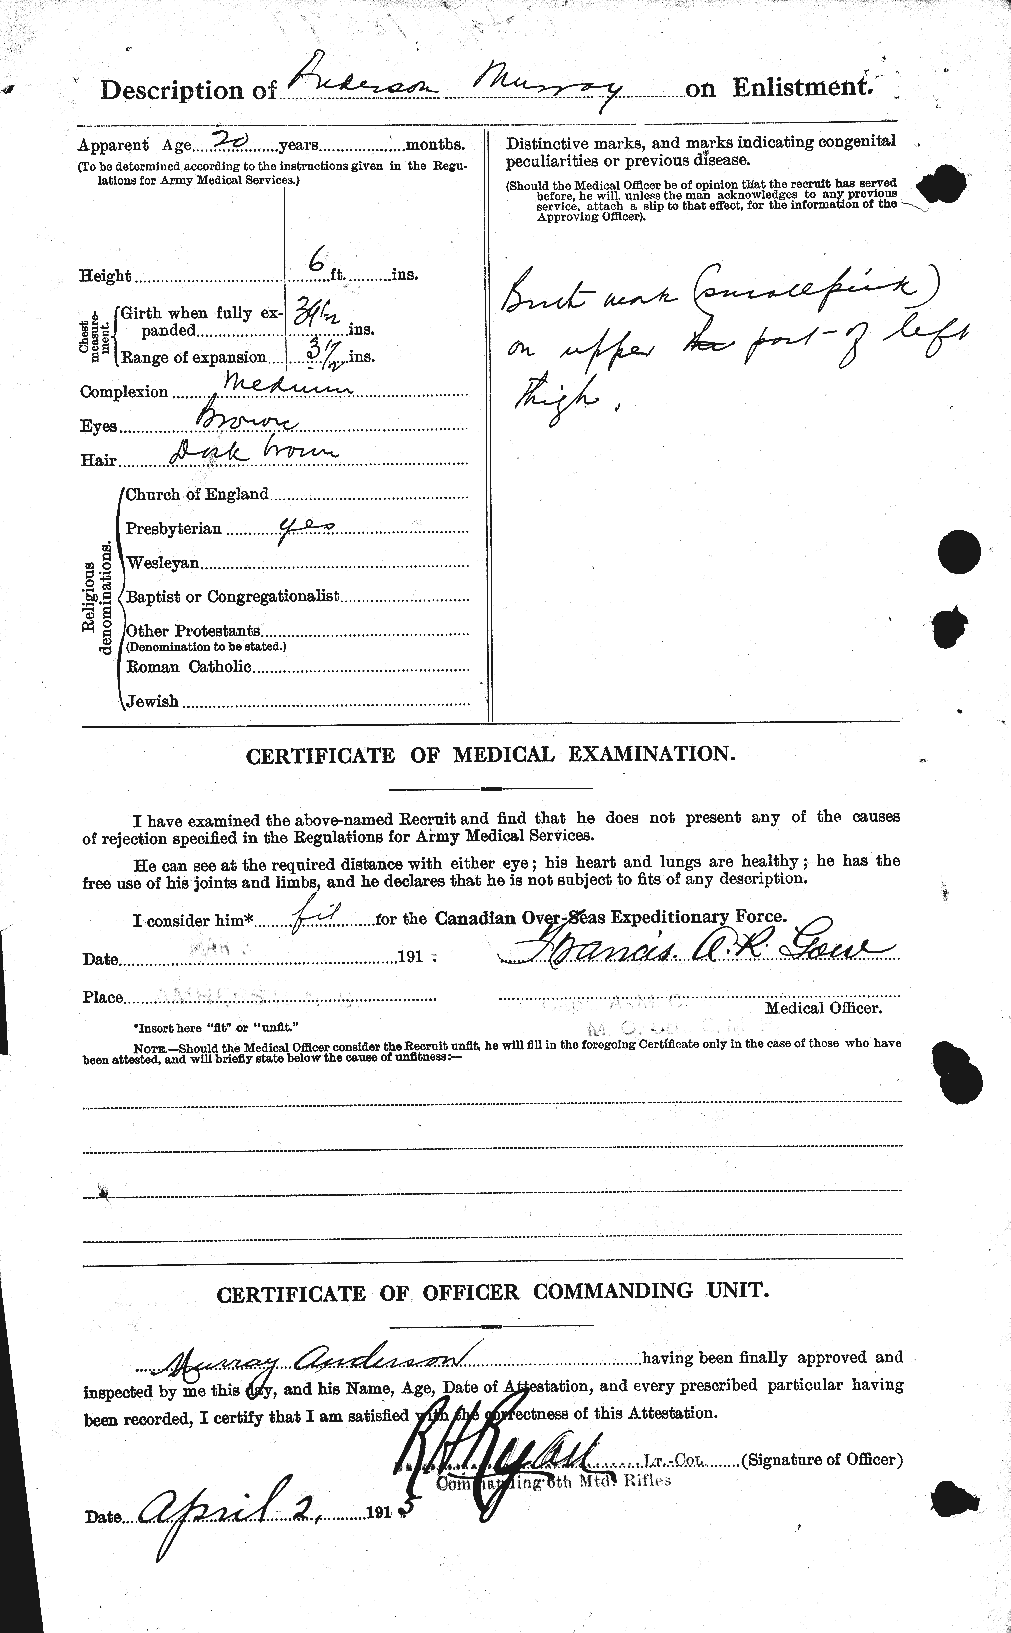 Personnel Records of the First World War - CEF 207425b